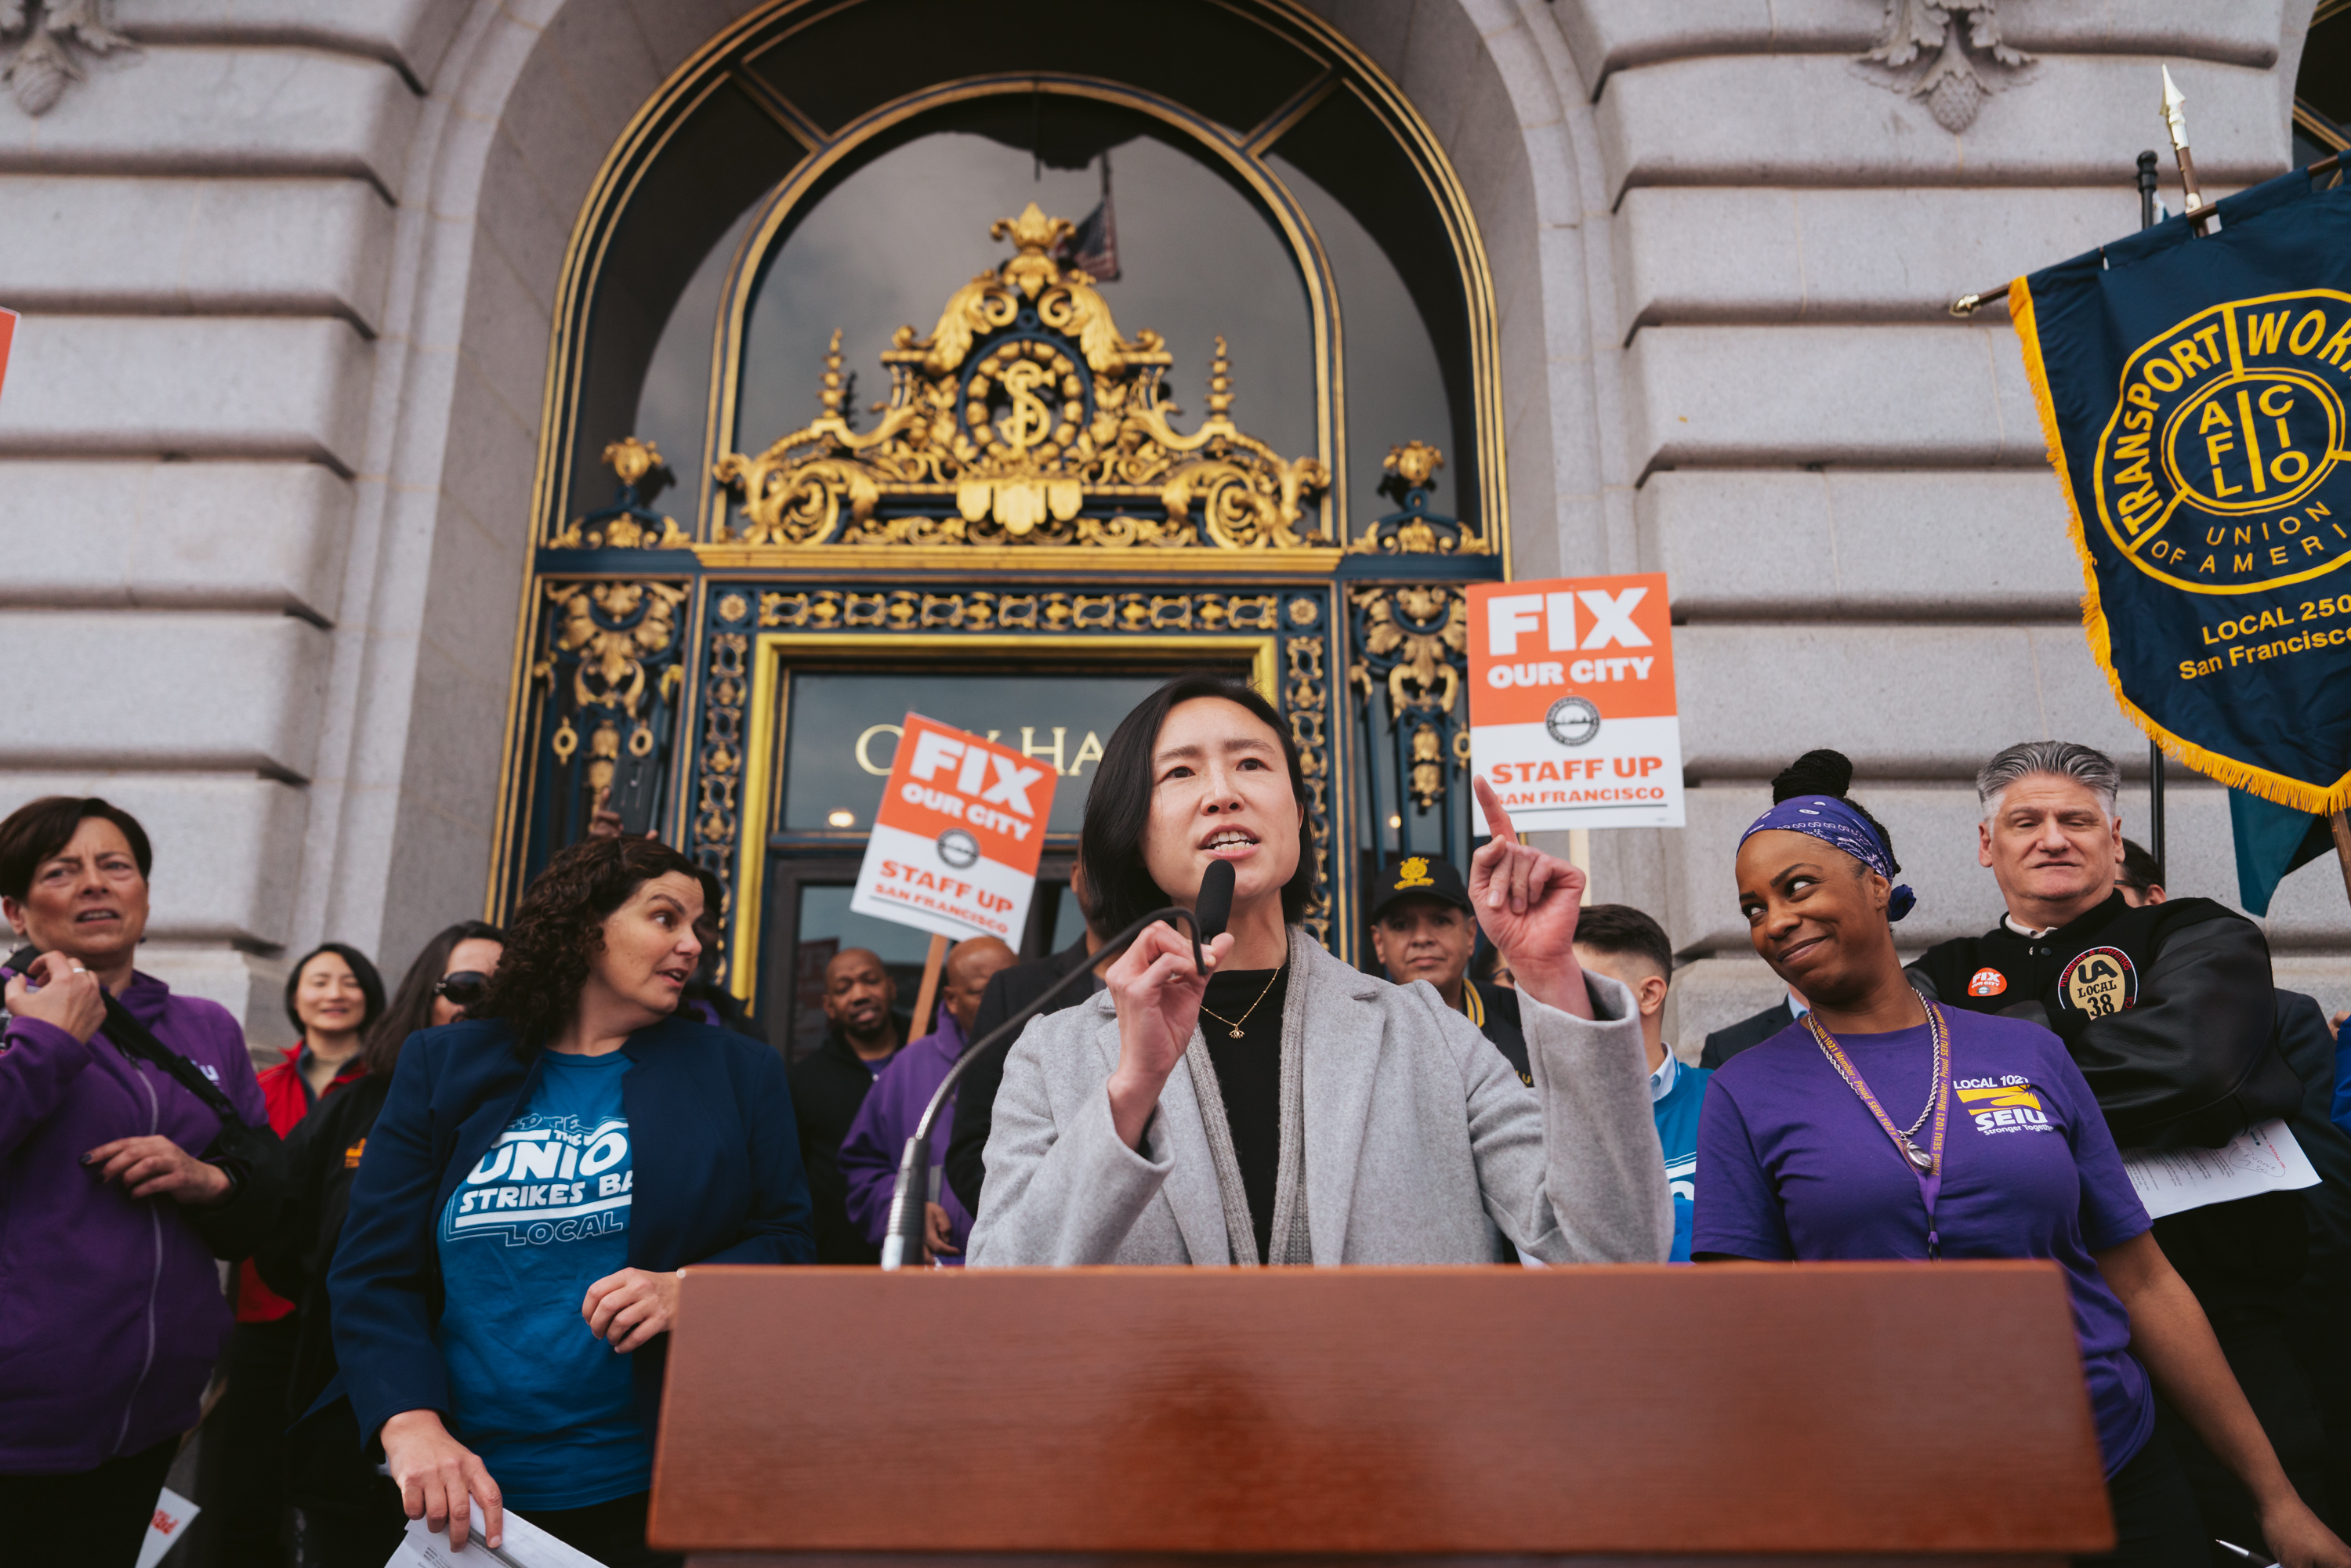 A person speaks at a podium before a group, some with union signs, outside an ornate building.